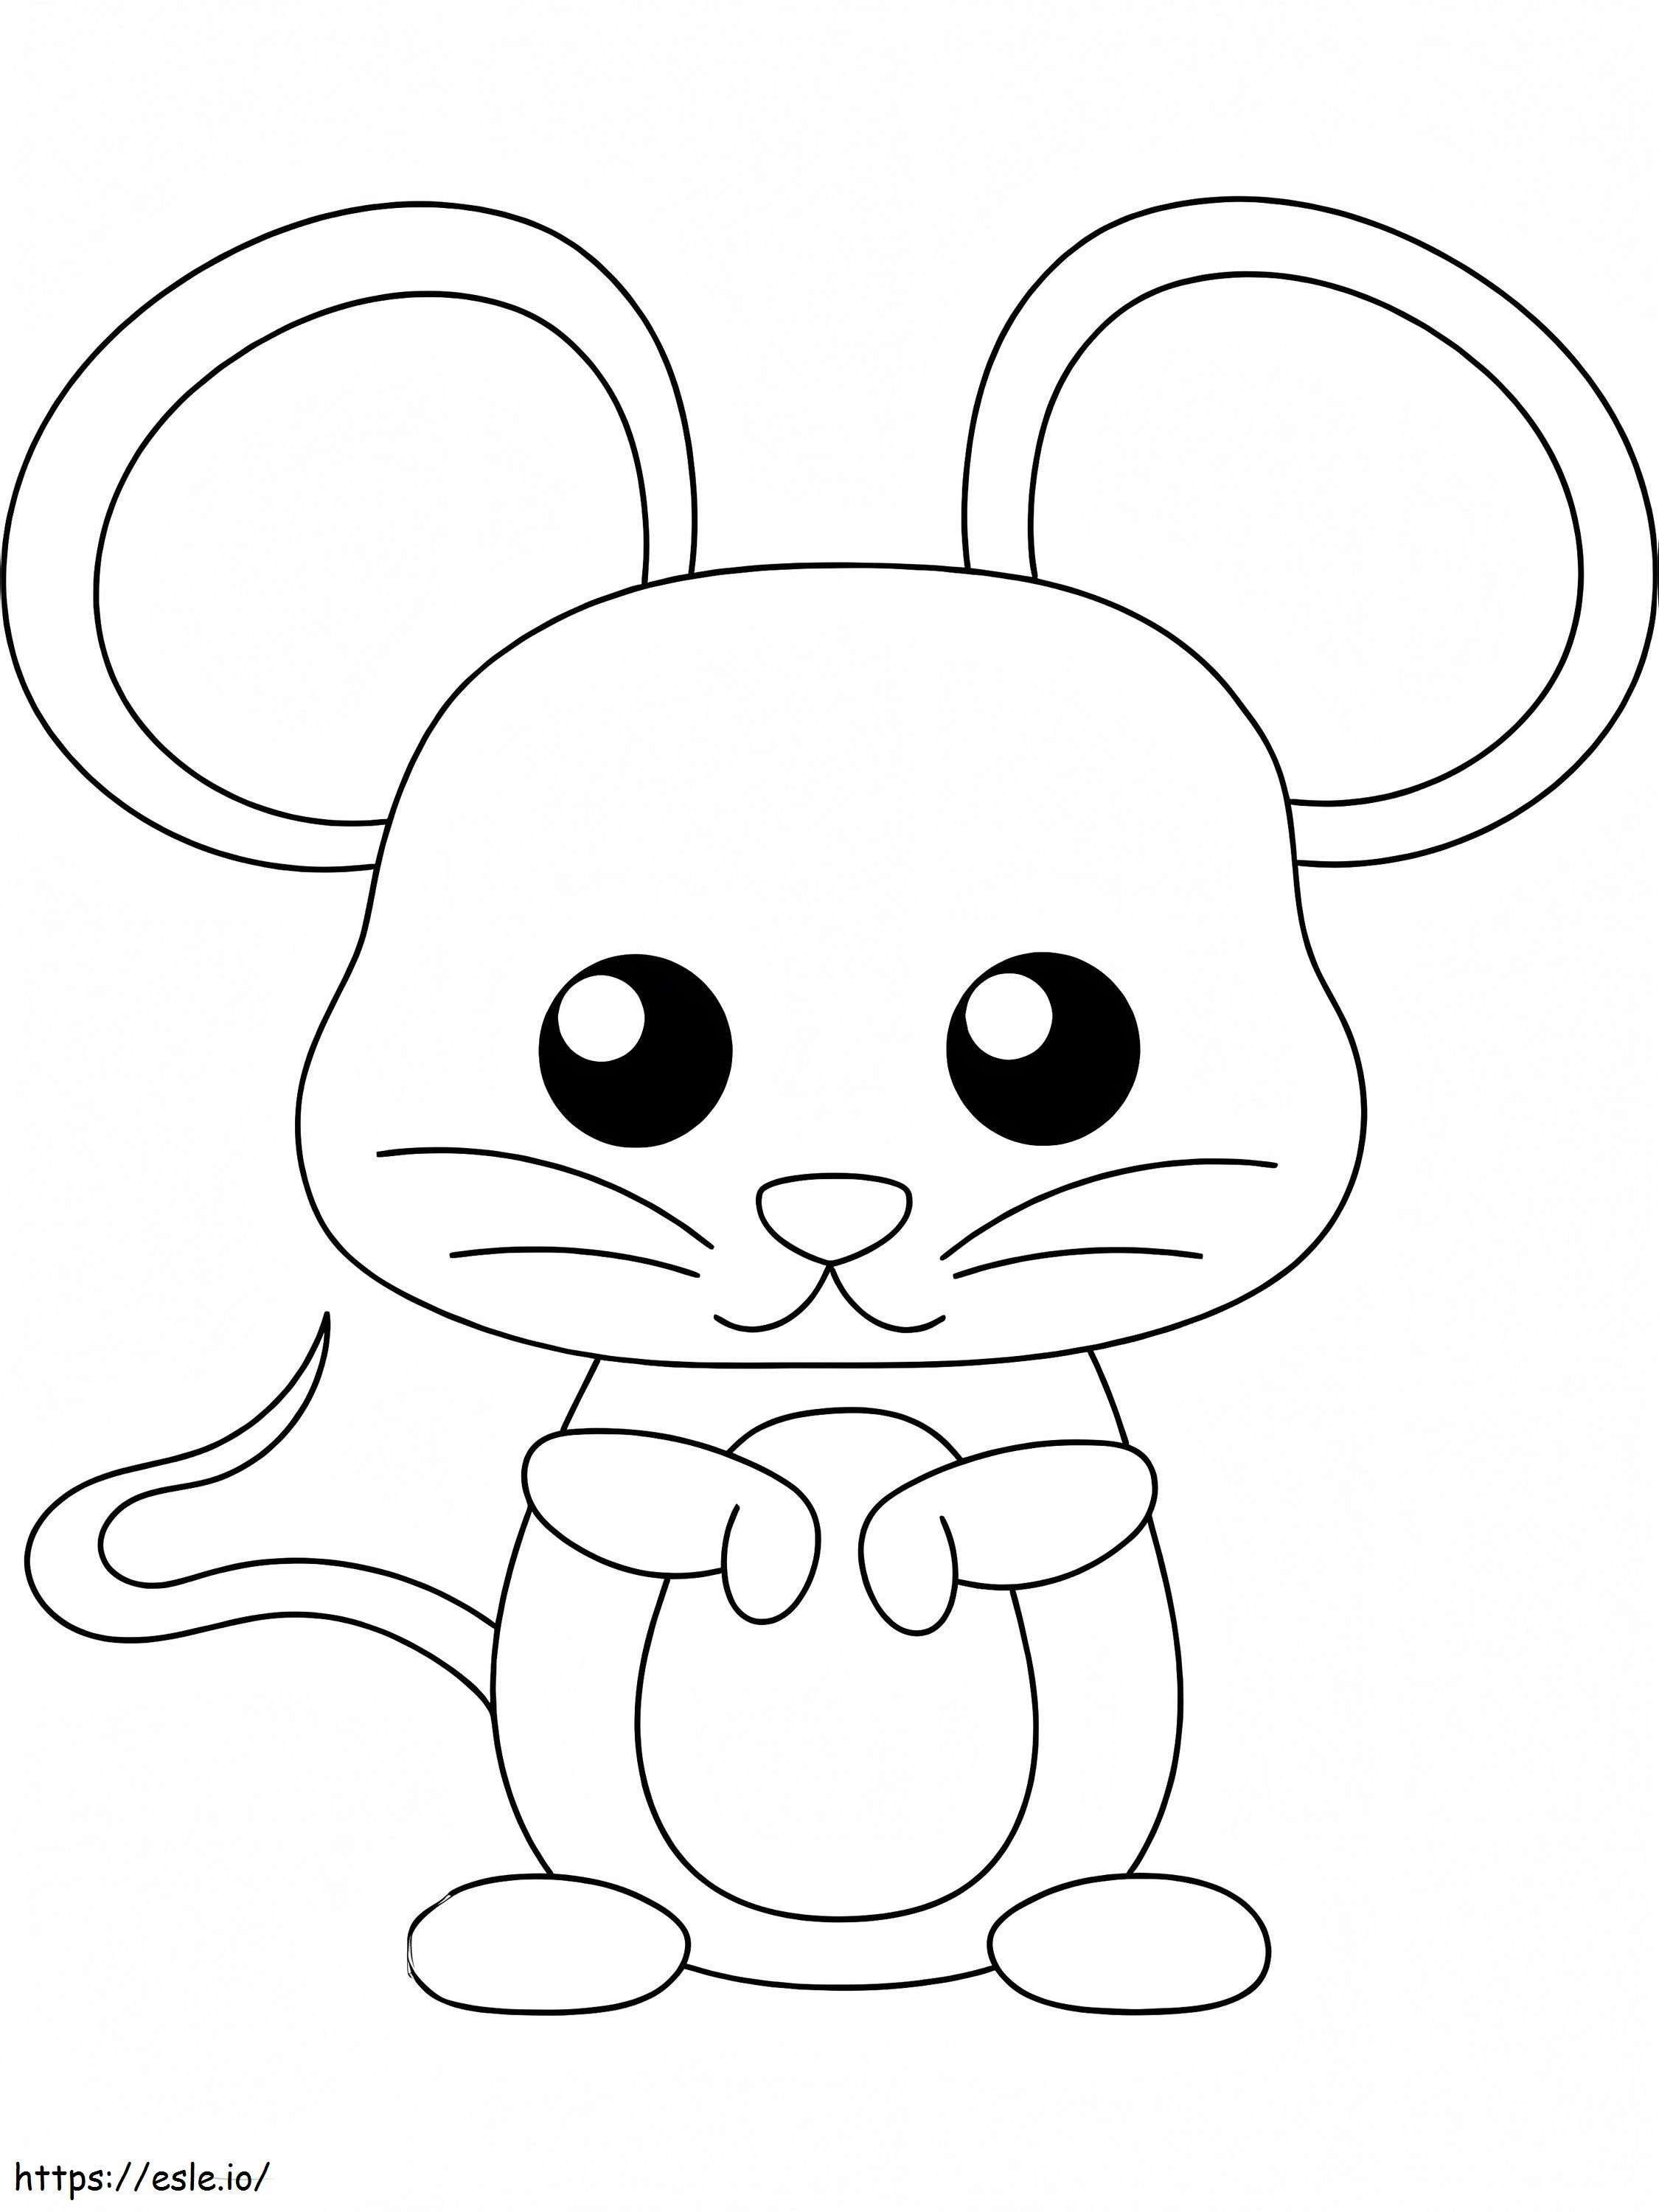 Cartoon Mouse coloring page